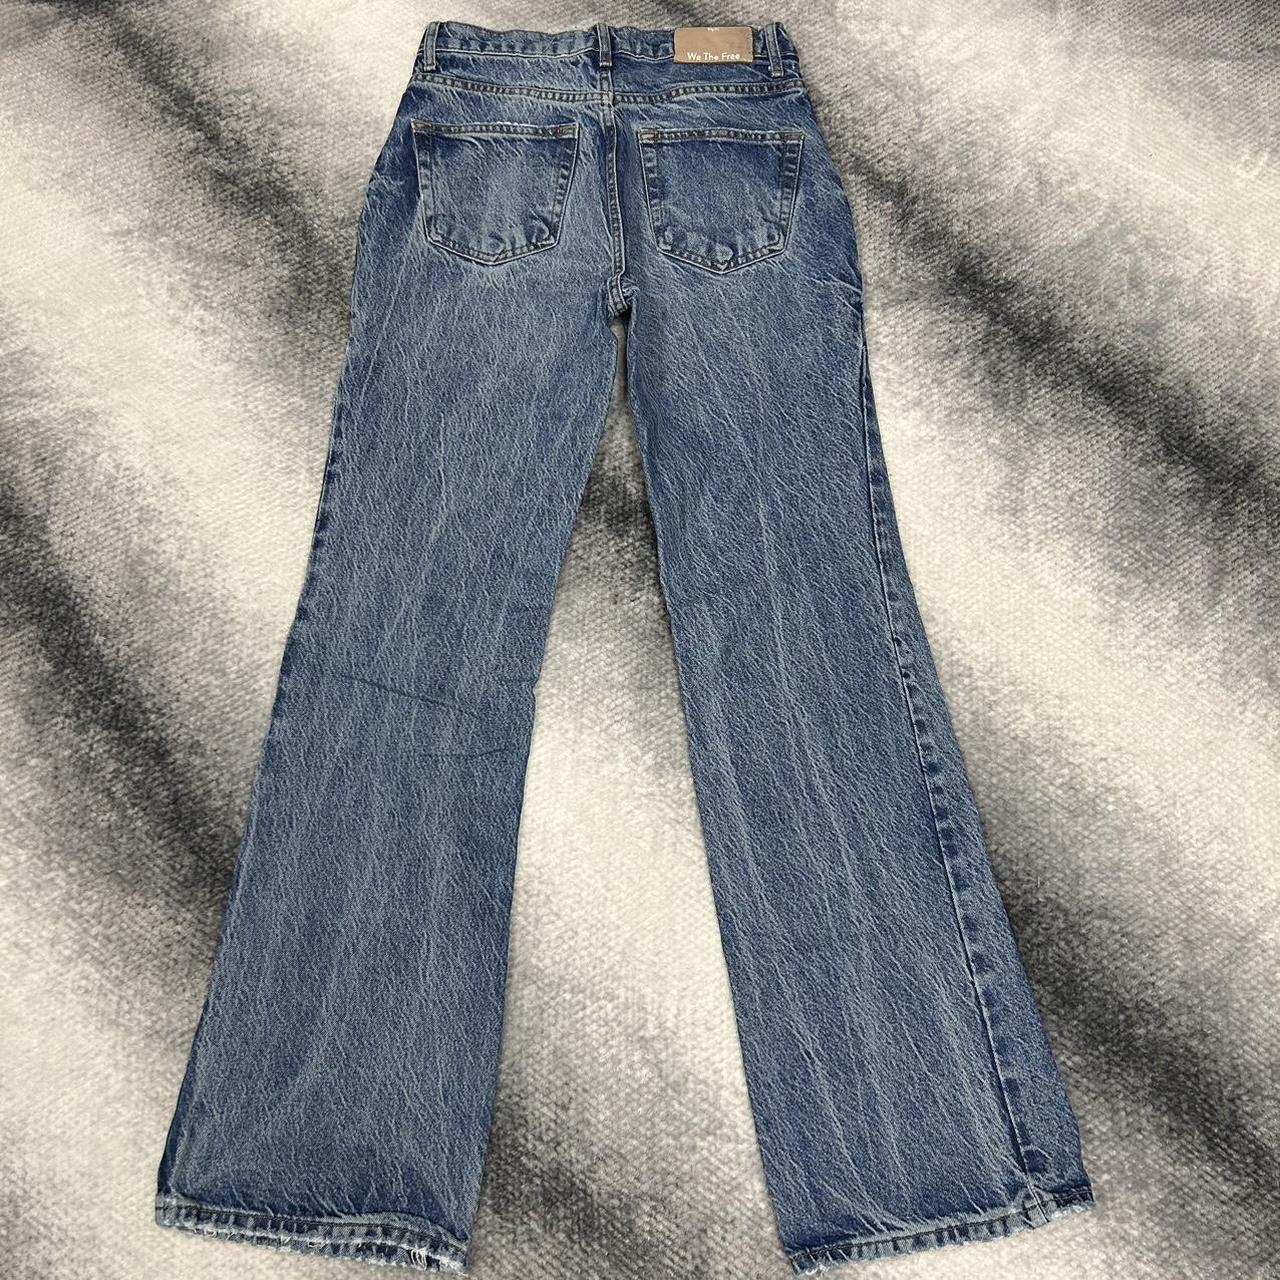 free people high waisted baggy jeans in great... - Depop